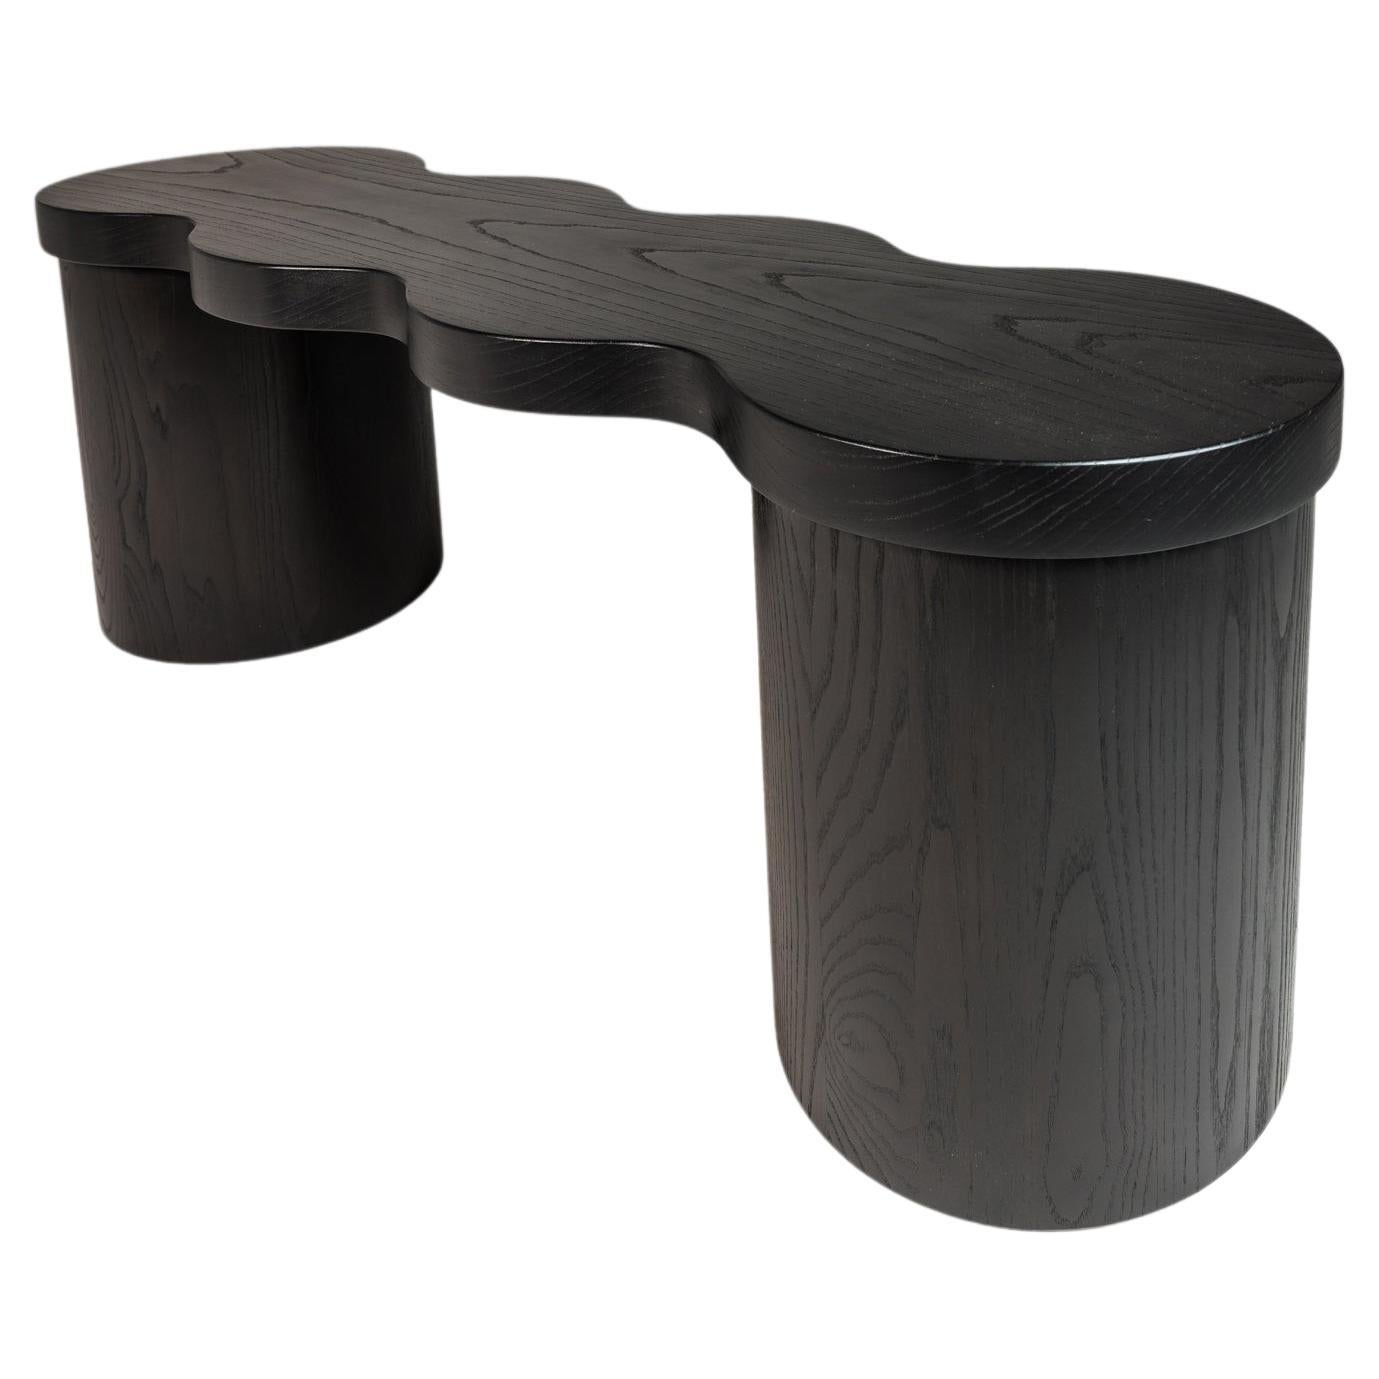 Hand-Turned Sculptural Bench in Solid Ebonized Ash by Mark Leblanc, c. 2000s For Sale